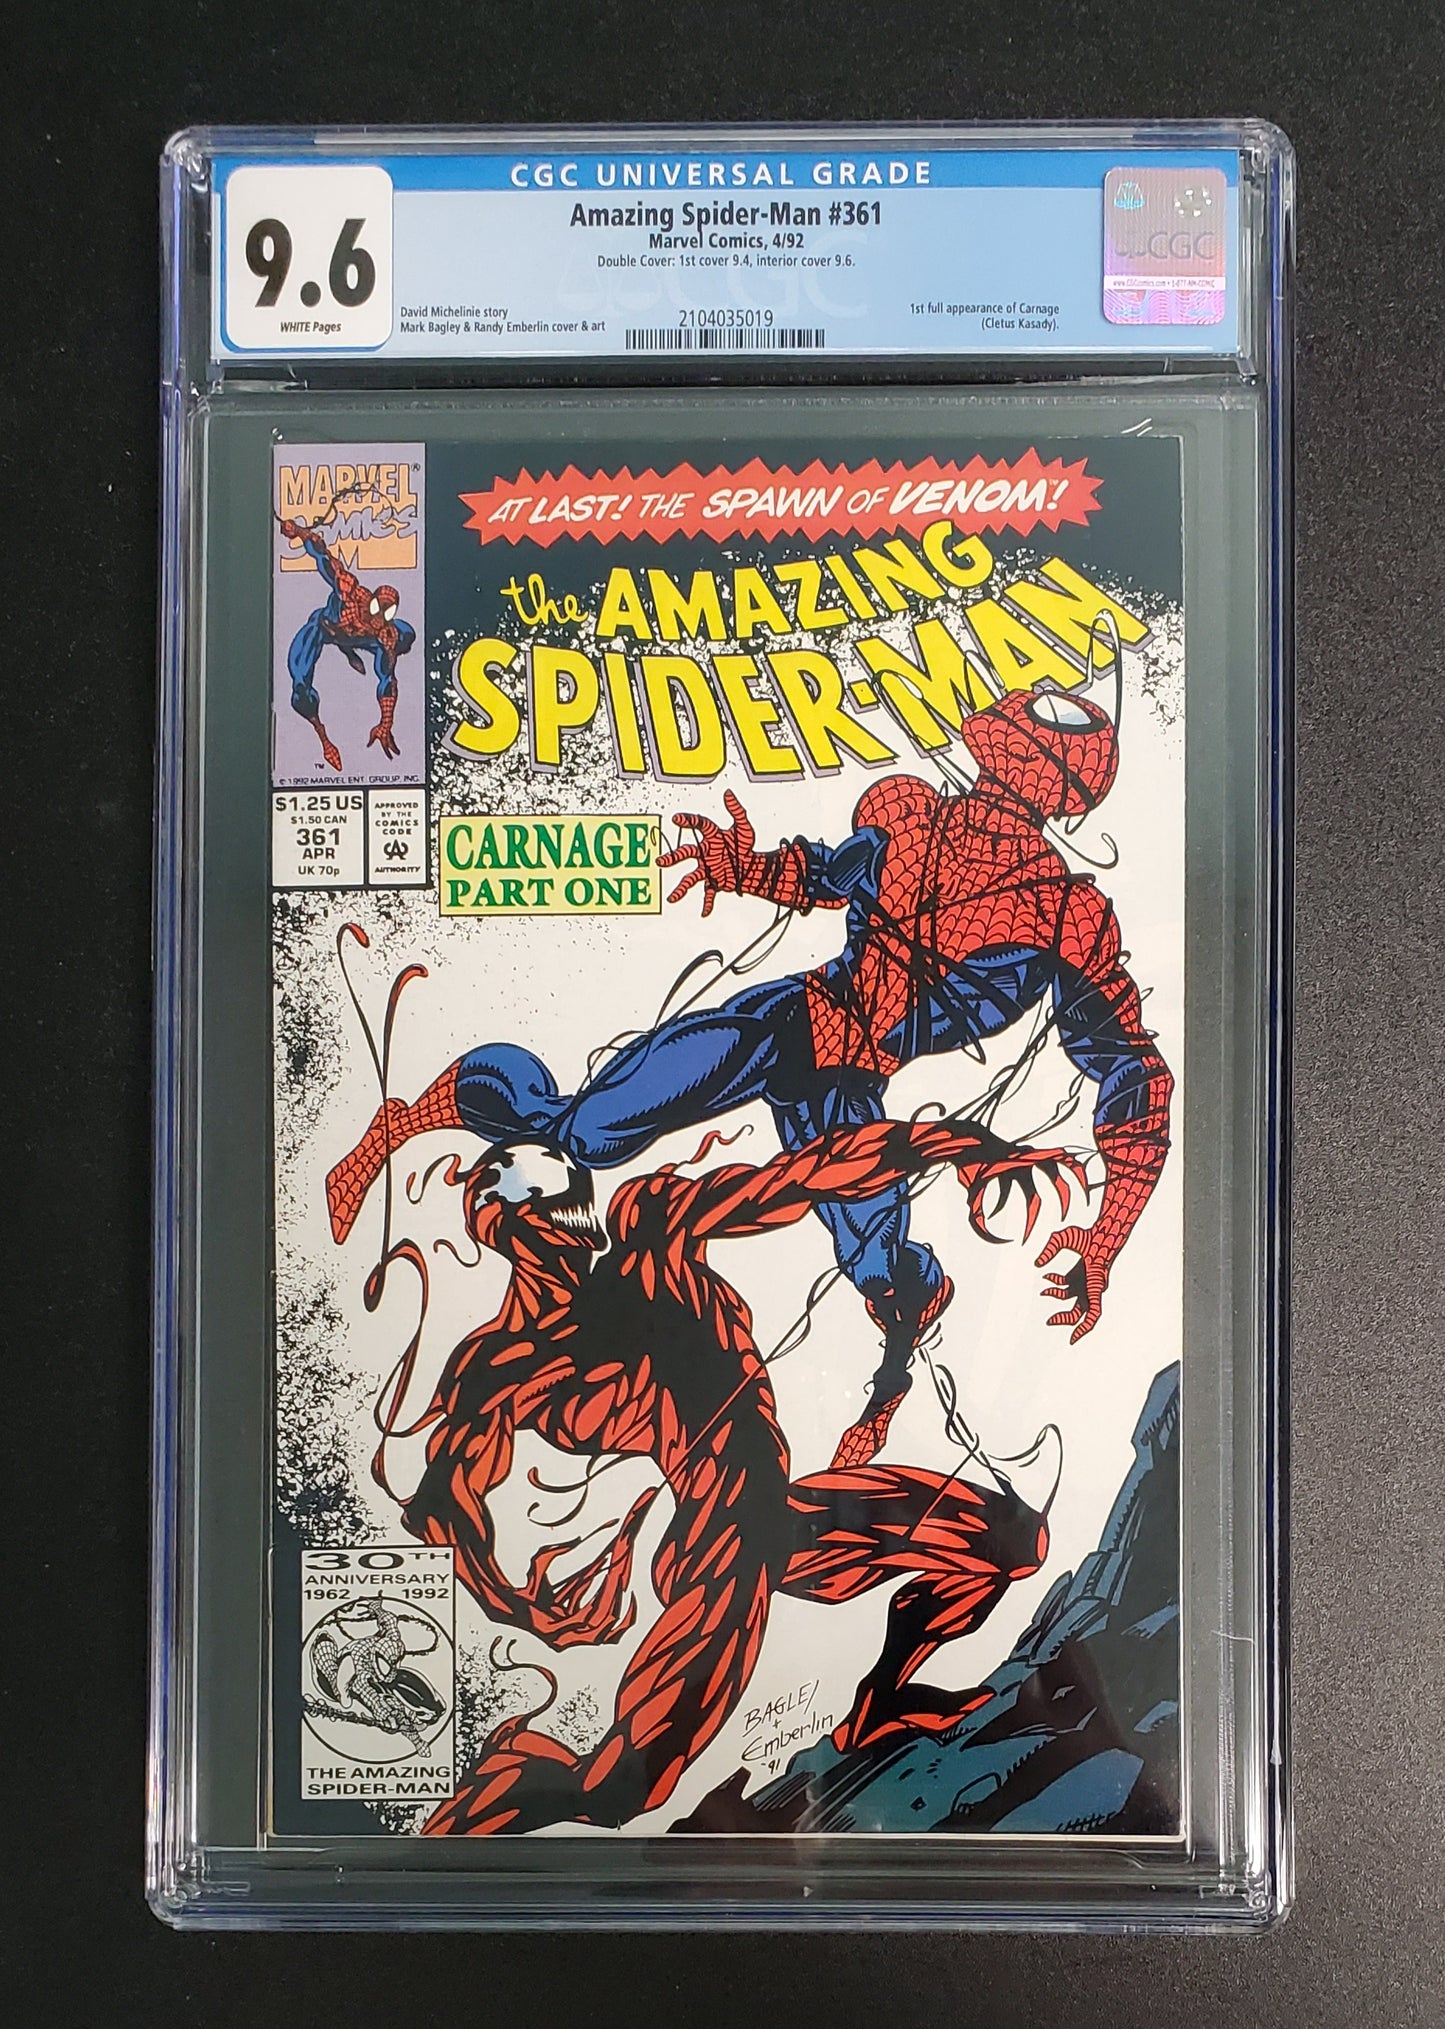 CGC DOUBLE COVER 9.4 (1st Cover) 9.6 (Interior Cover) Amazing Spider-Man #361 (1st App Carnage) 1992 [2104035019]